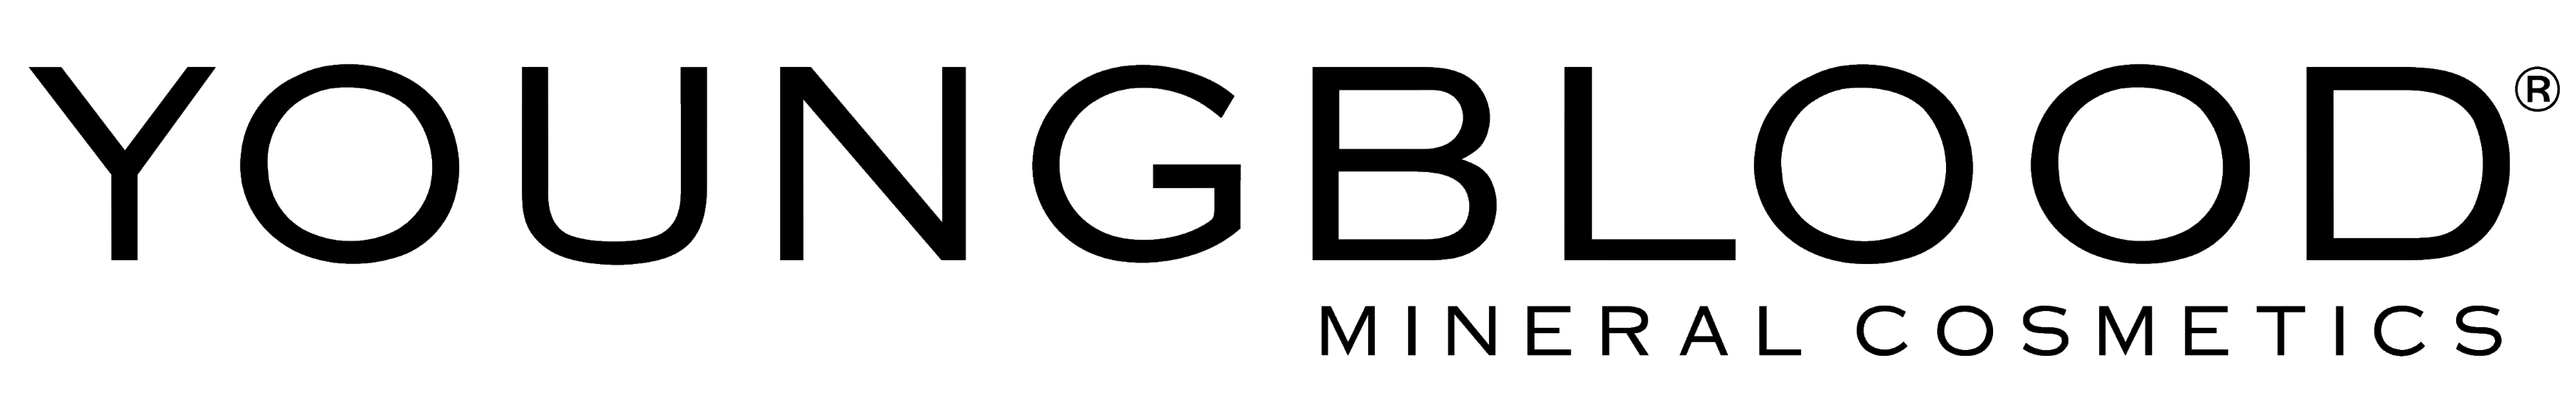 Youngblood Mineral Cosmetics logo, logotype